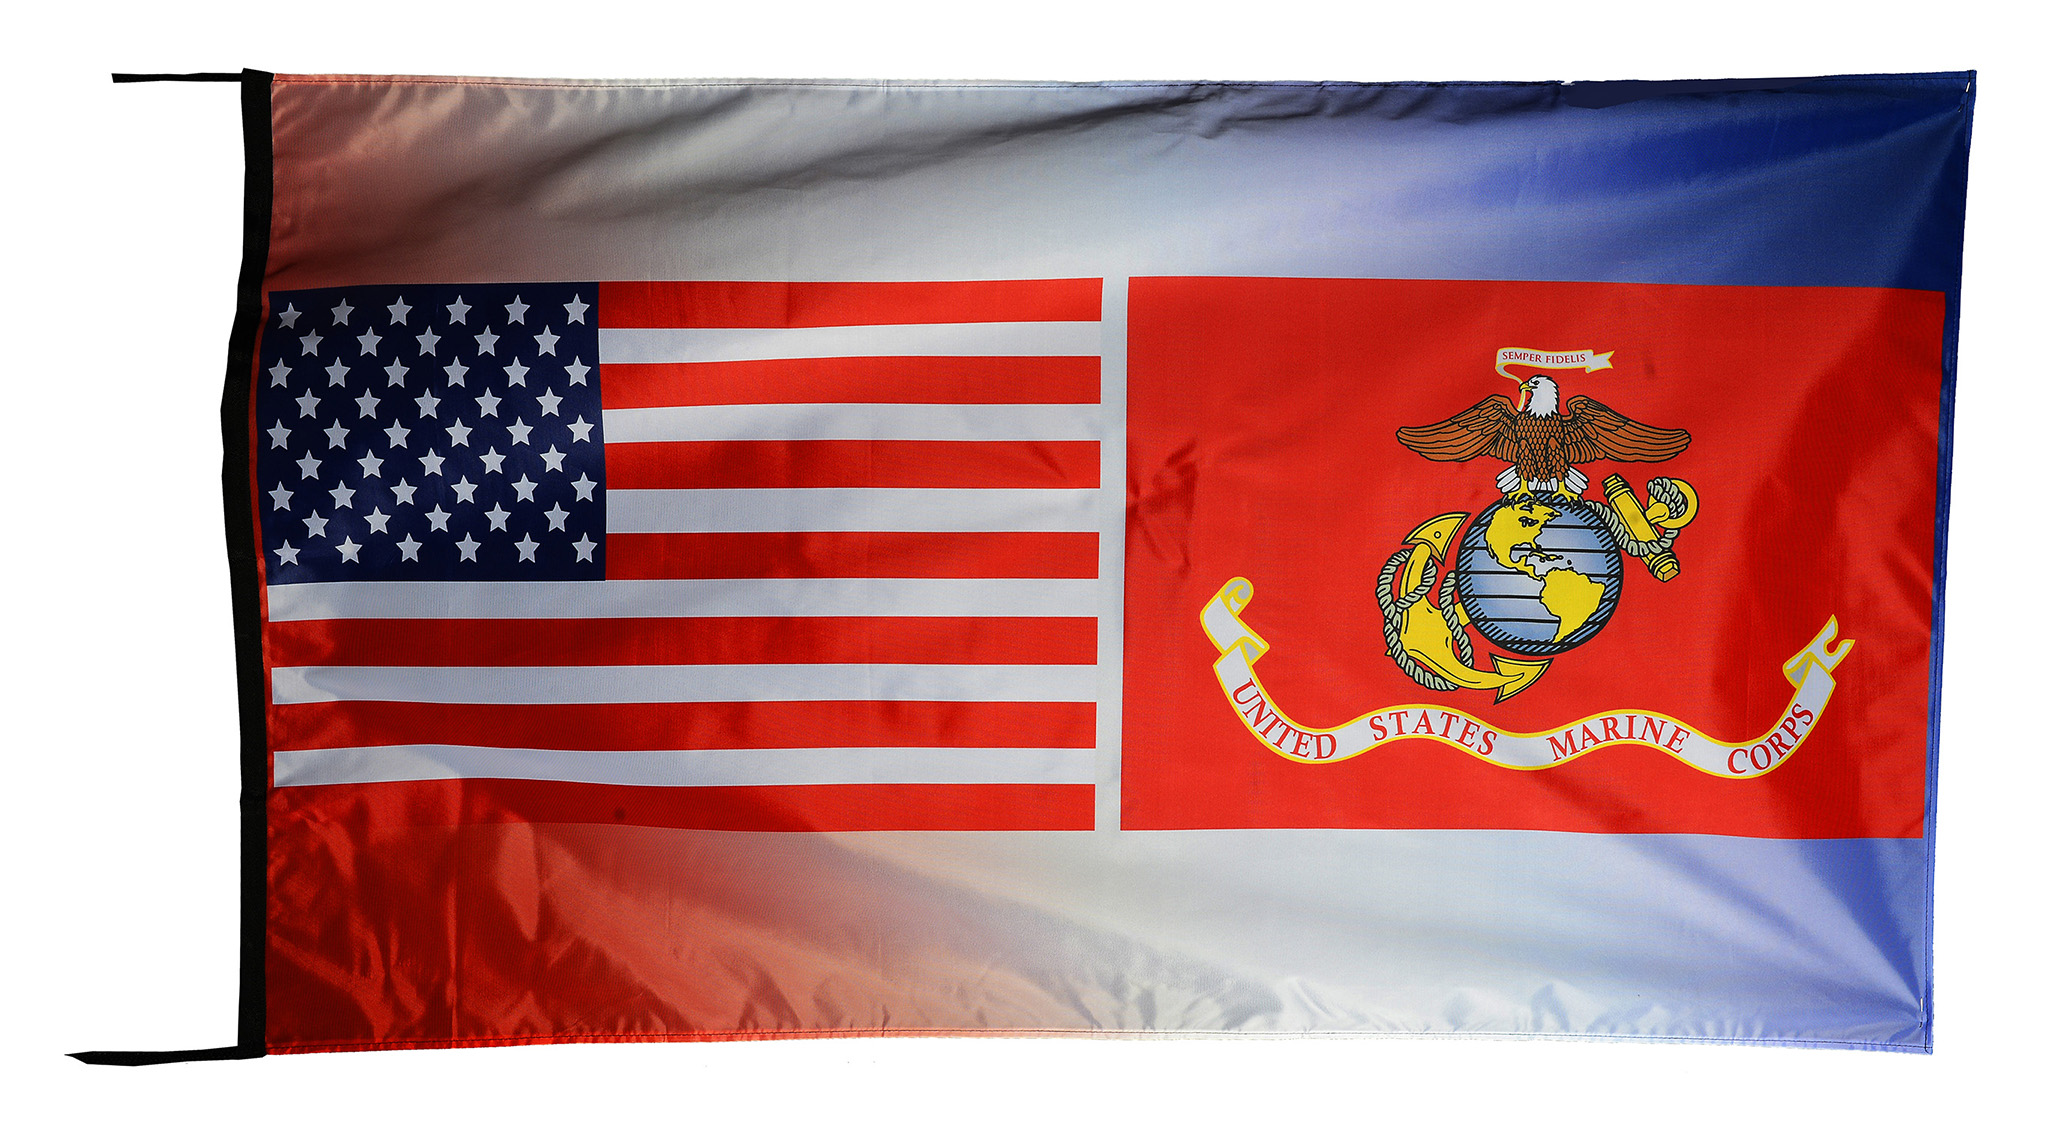 Flag  156 USA / US Country / United States Of America and US United States Marine Corps Flag (Red Background) / Patriotic / Pride Hybrid Weather-Resistant Polyester Outdoor Flag Landscape Banner / Vivid Colors / 3 X 5 FT (150 x 90cm) International Flags for Sale